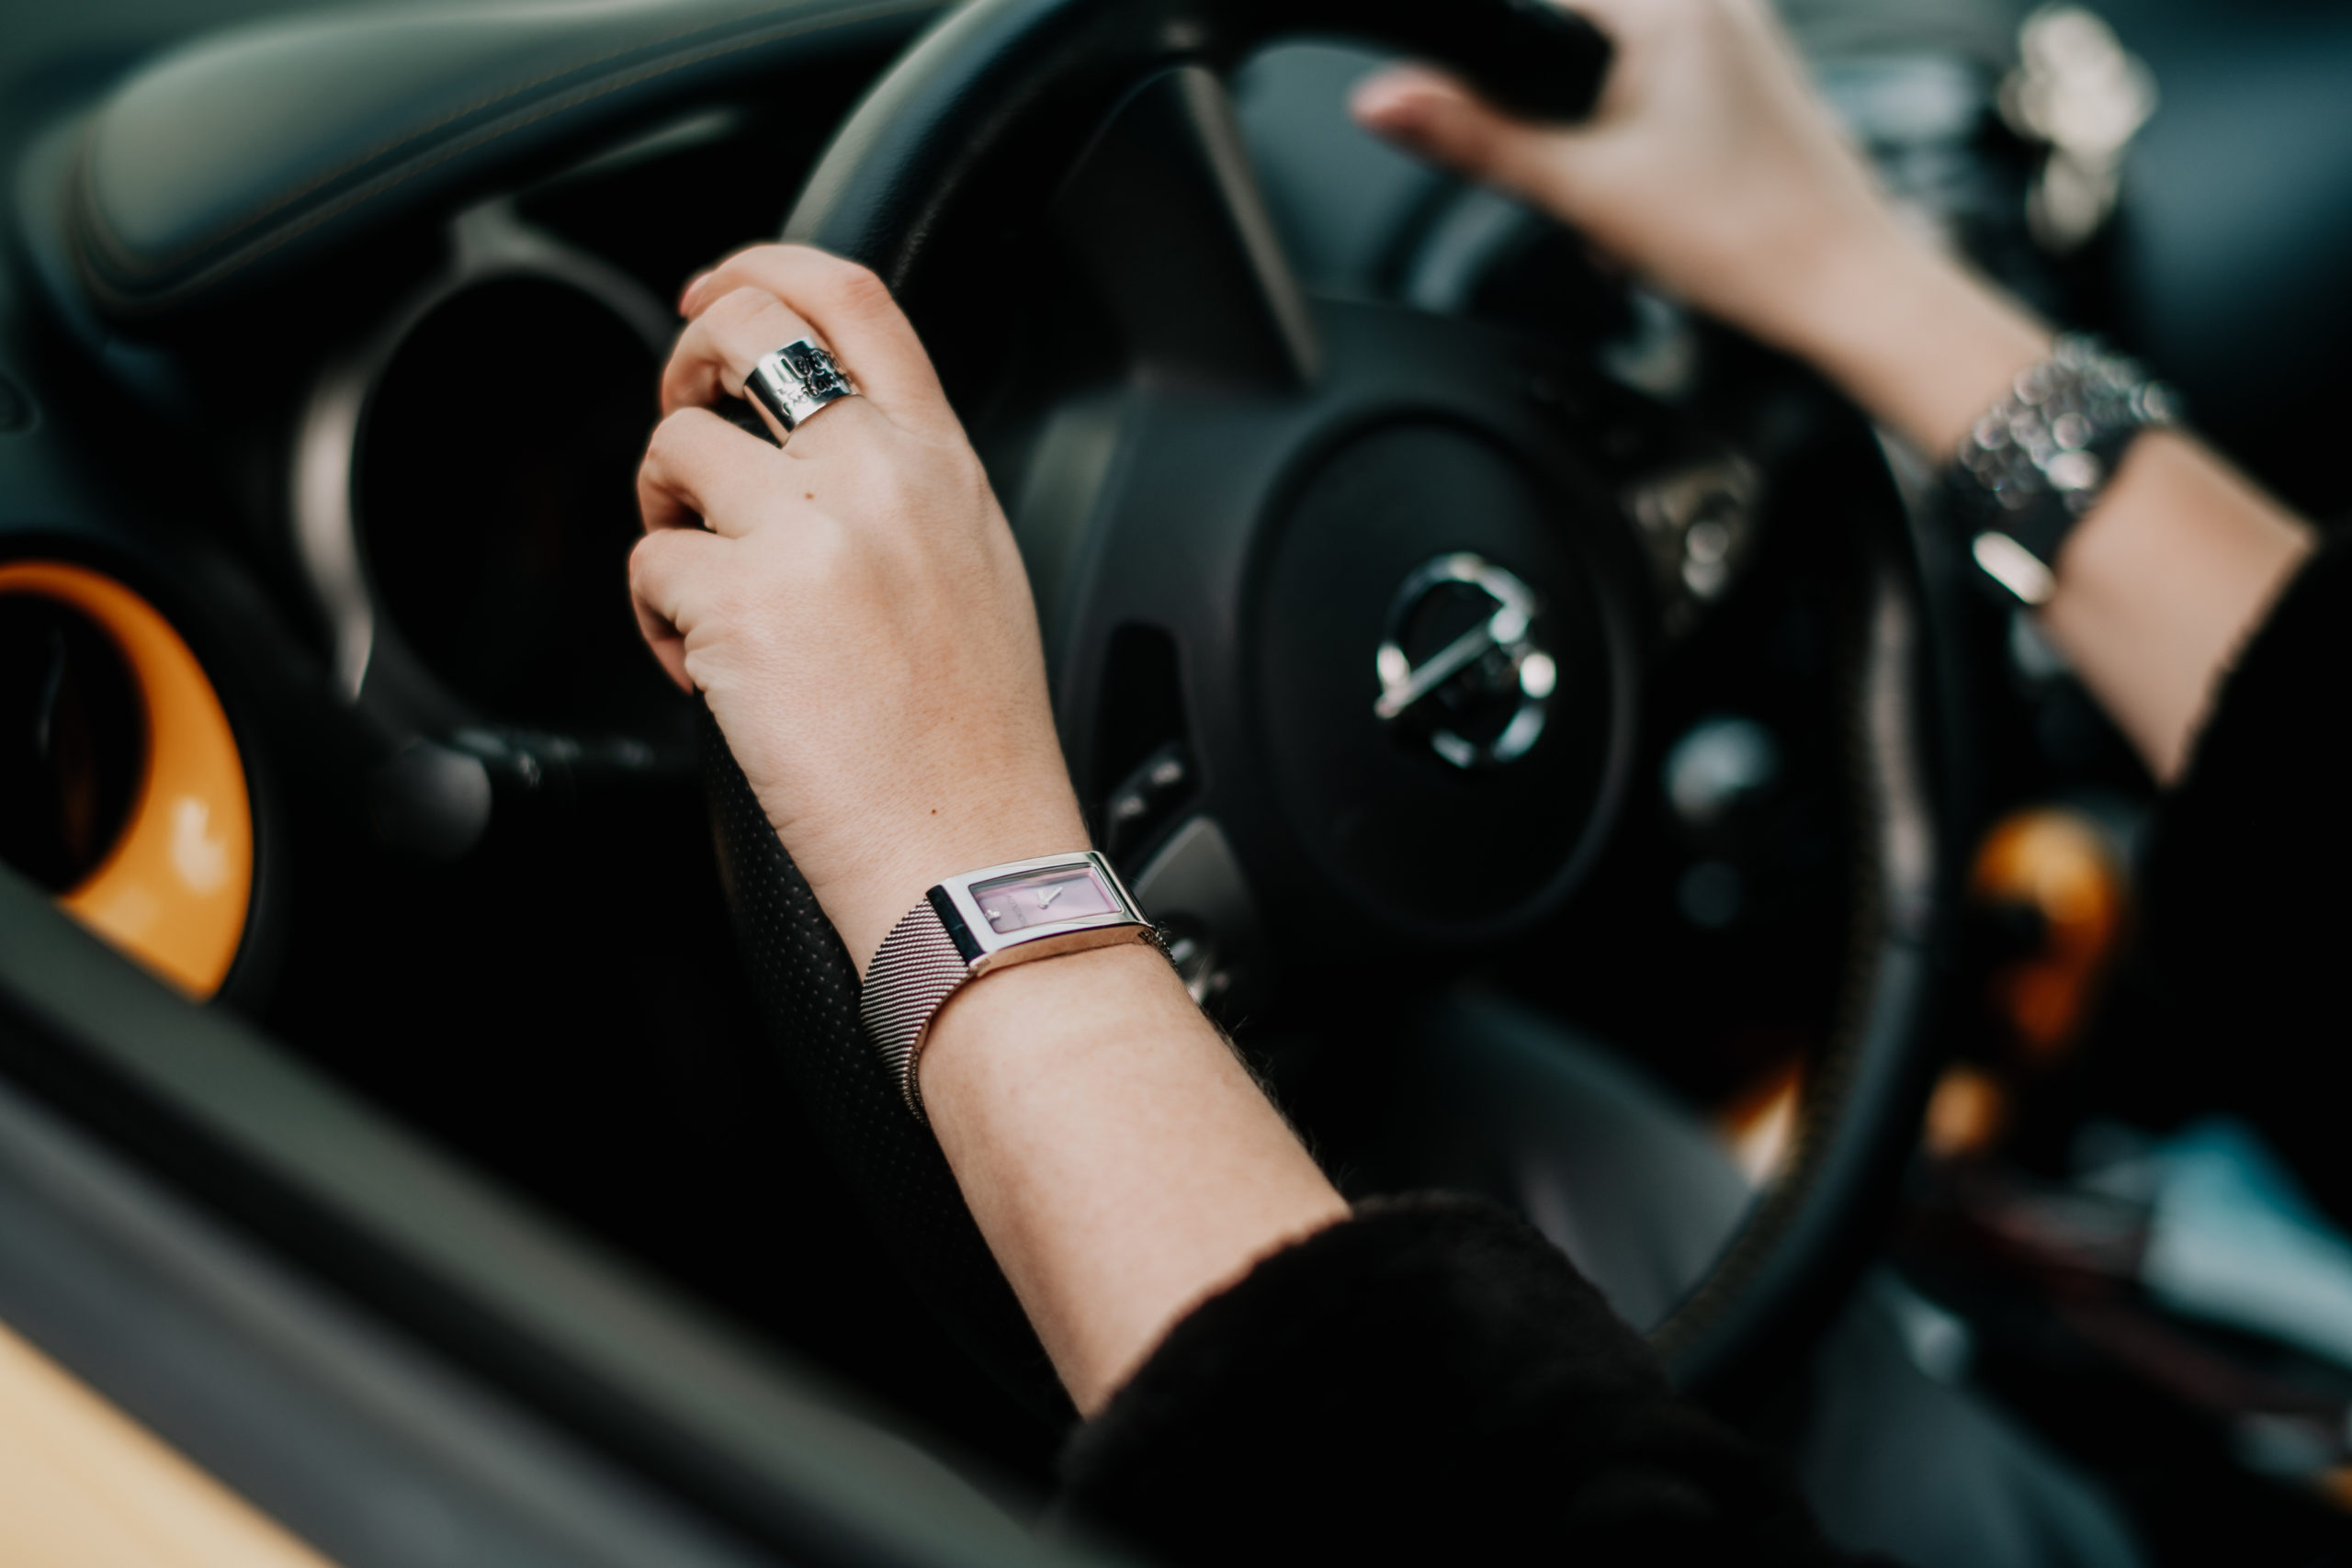 https://autolab.com.co/wp-content/uploads/the-girl-s-hands-are-holding-the-steering-wheel-of-2022-11-07-05-54-06-utc-scaled.jpg